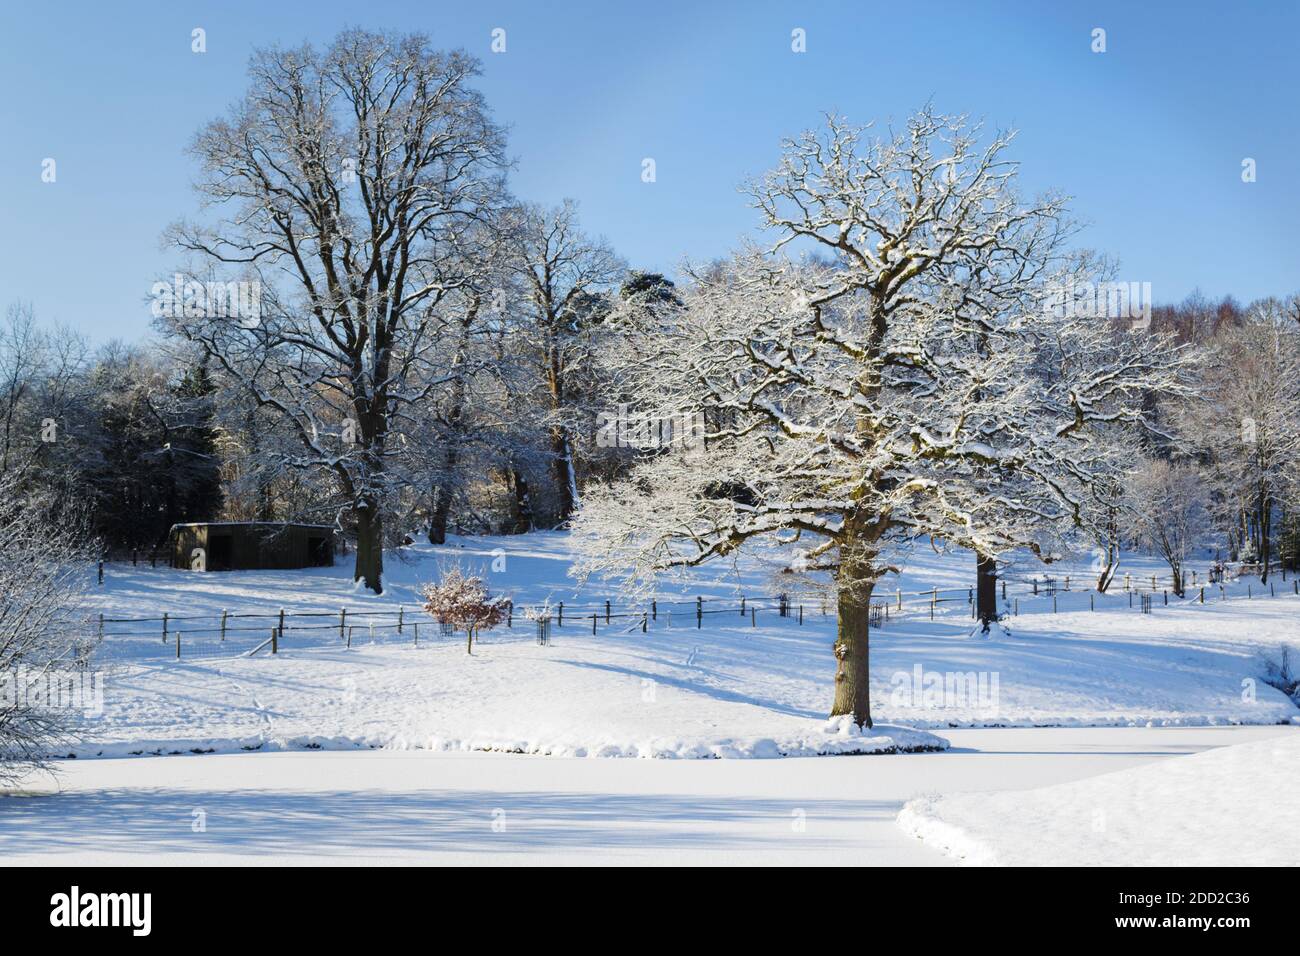 Walking in the country side around Mayfield, East Sussex, England in the snow in winter. Stock Photo